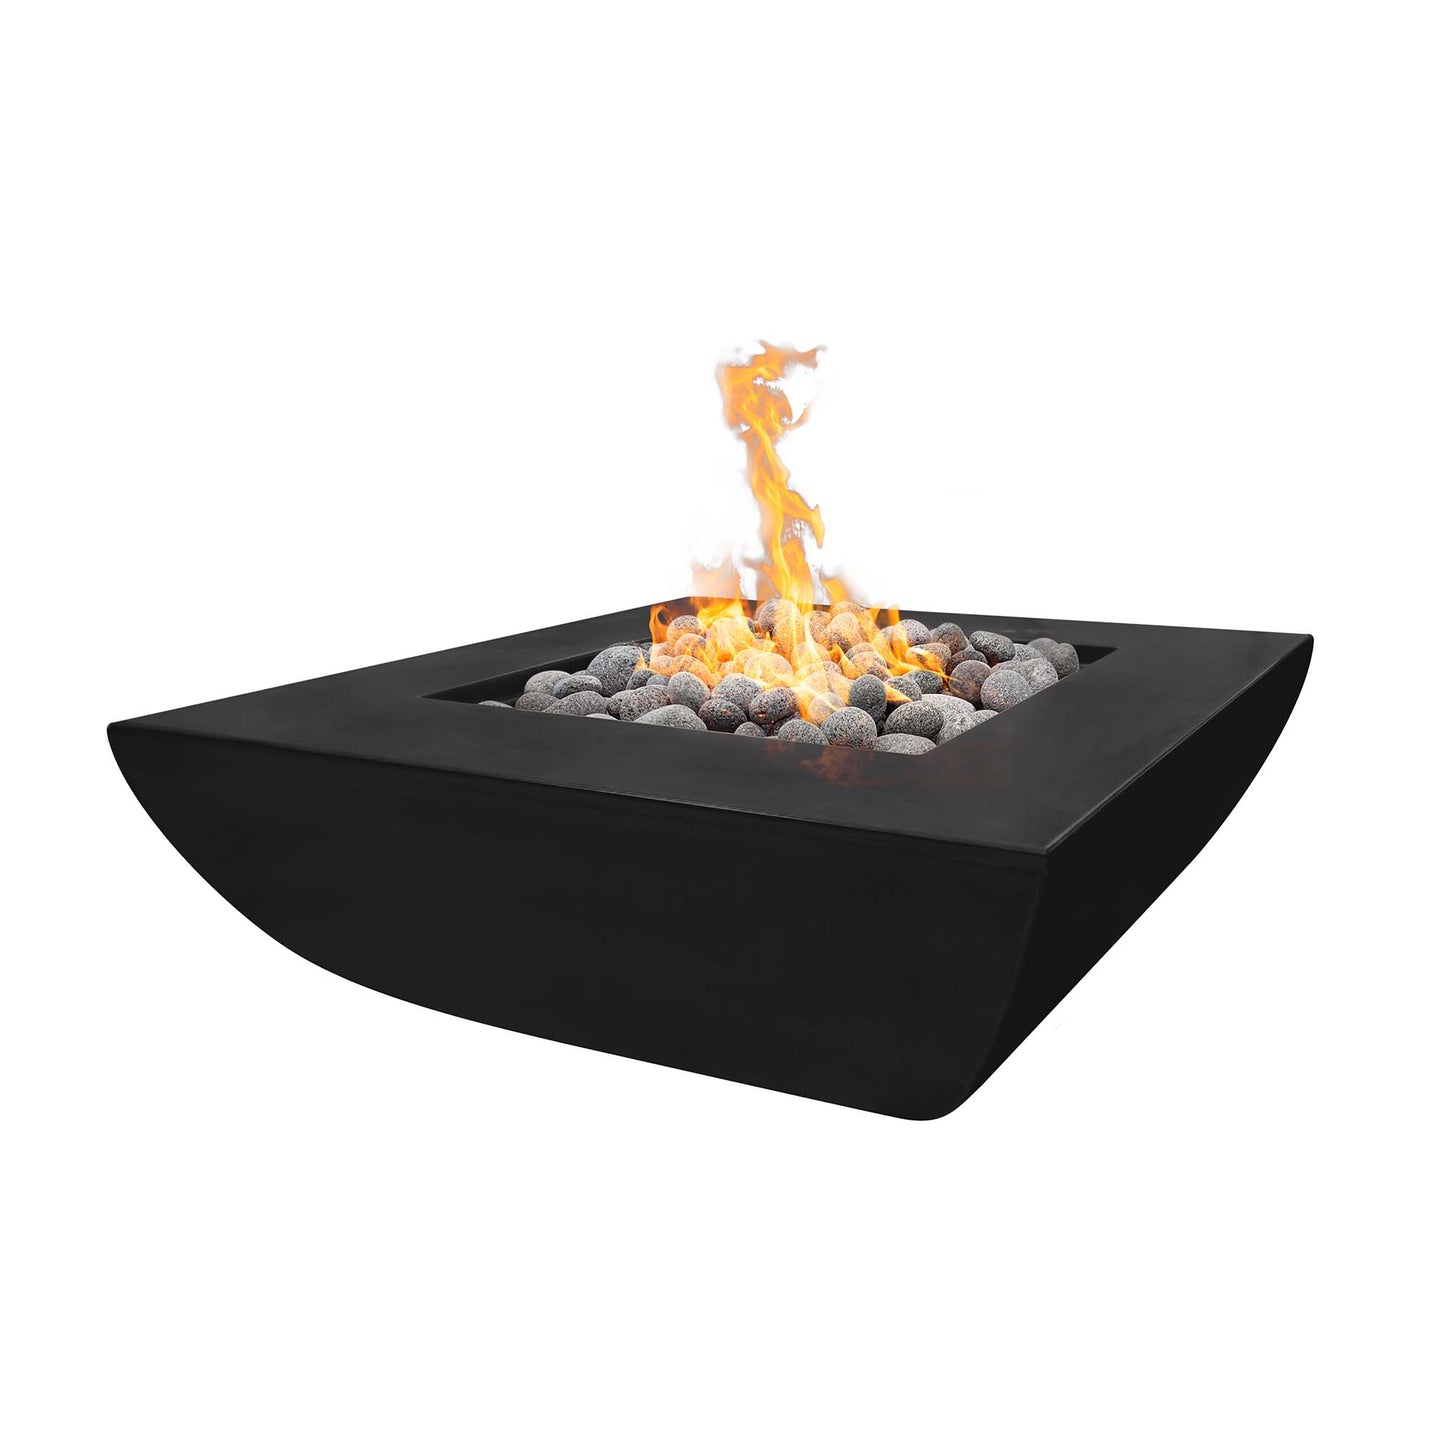 The Outdoor Plus Square Avalon 42" Metallic Copper GFRC Concrete Natural Gas Fire Pit with Flame Sense with Spark Ignition